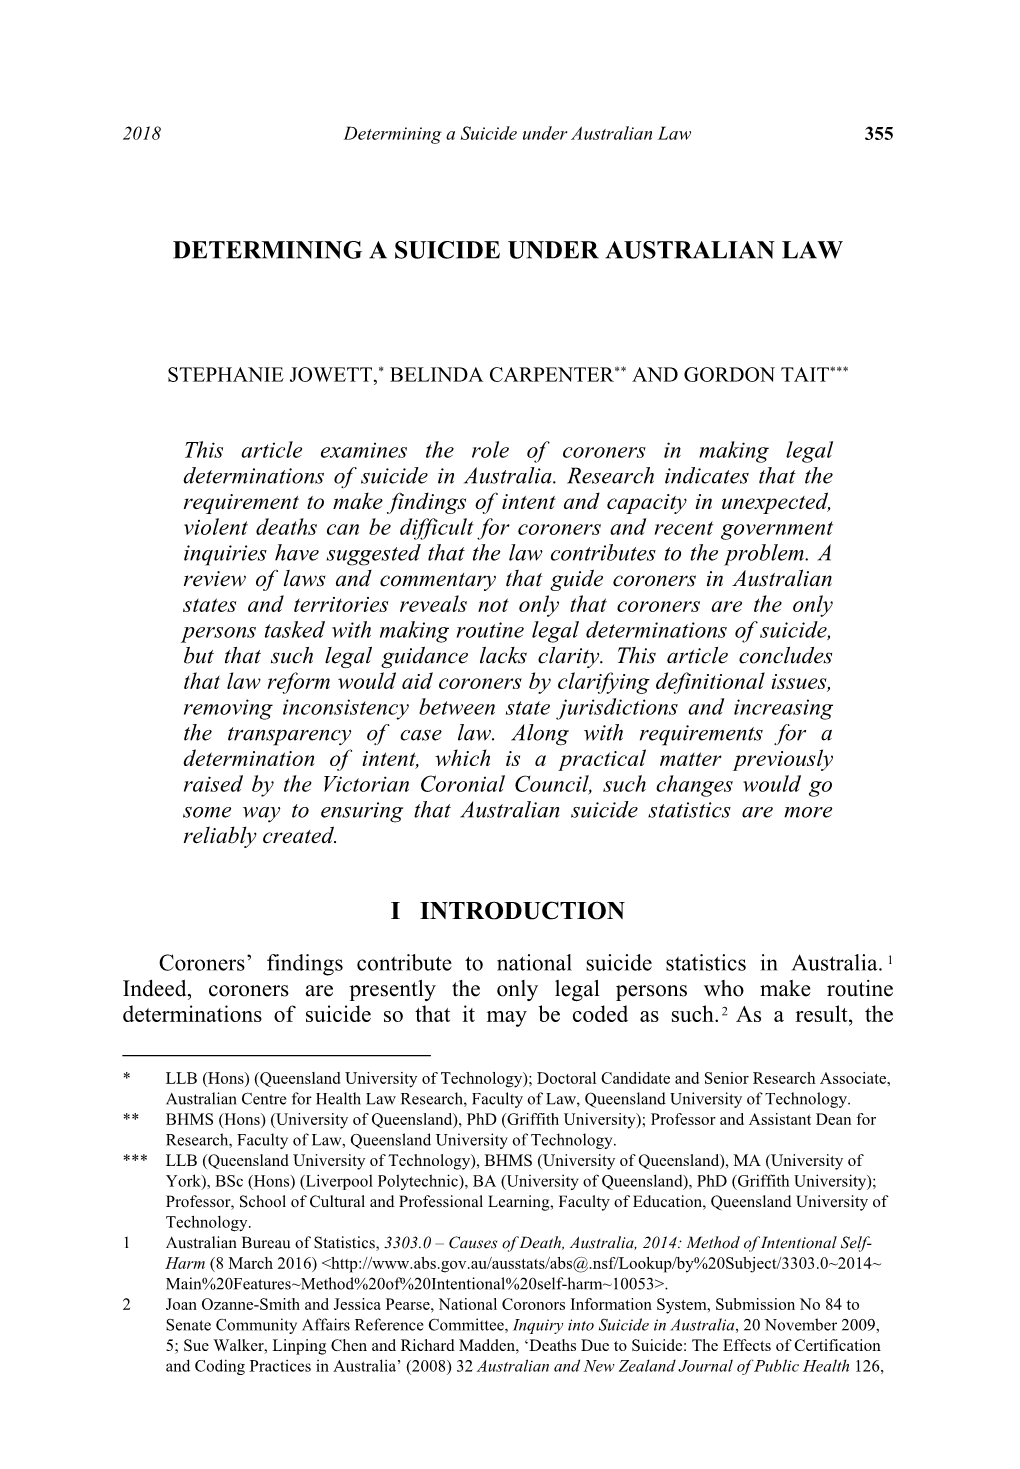 Determining a Suicide Under Australian Law I Introduction